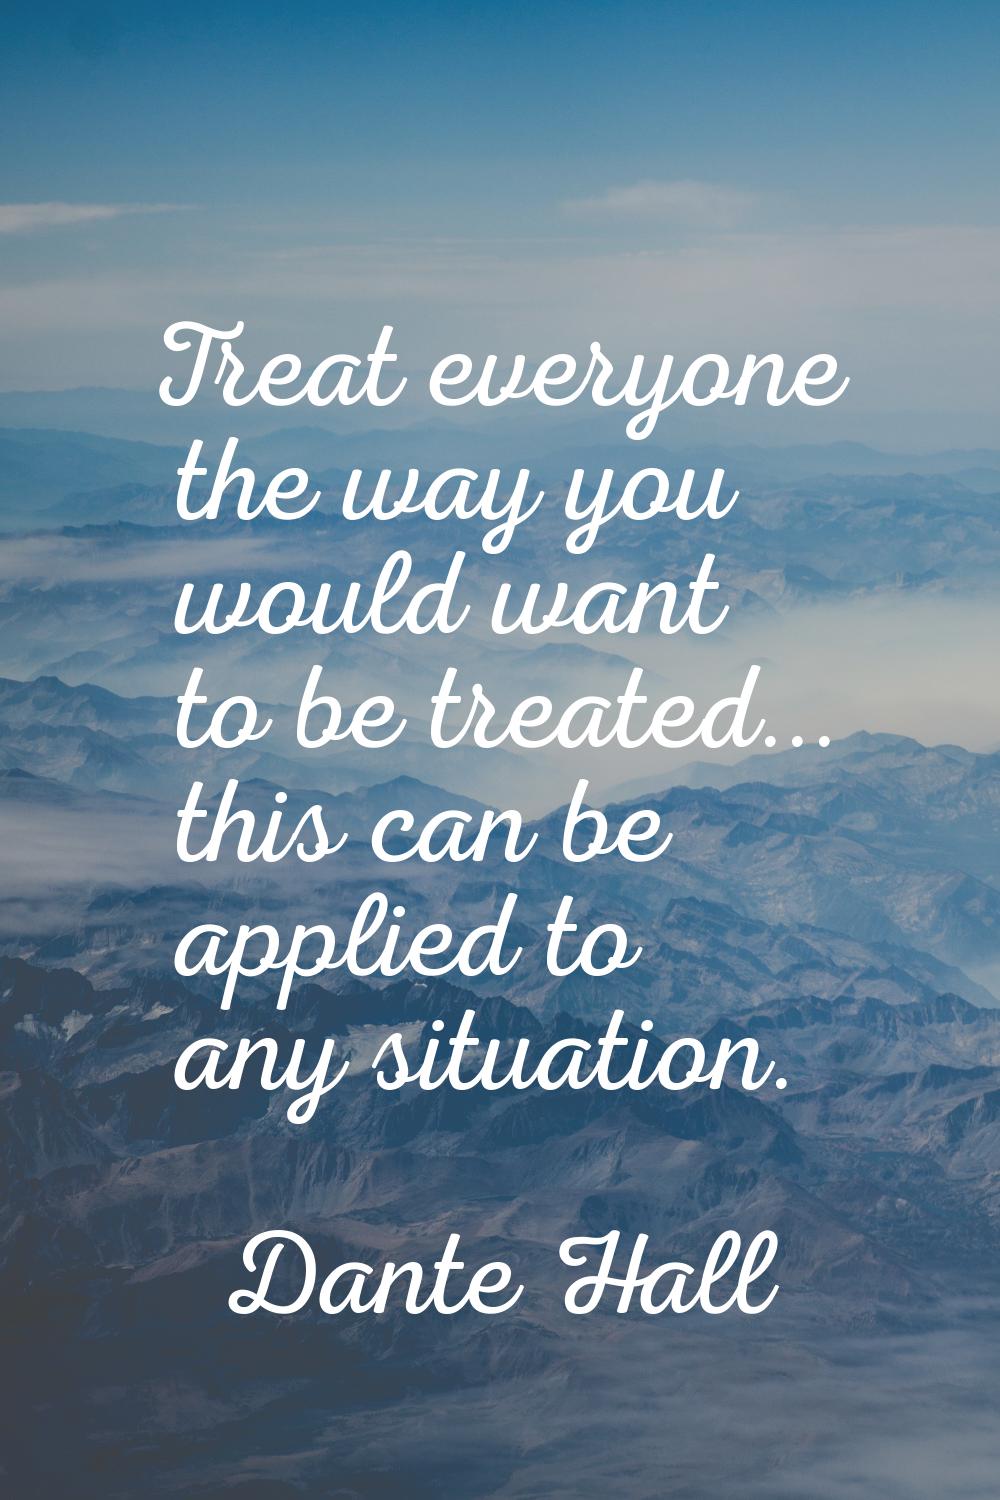 Treat everyone the way you would want to be treated... this can be applied to any situation.